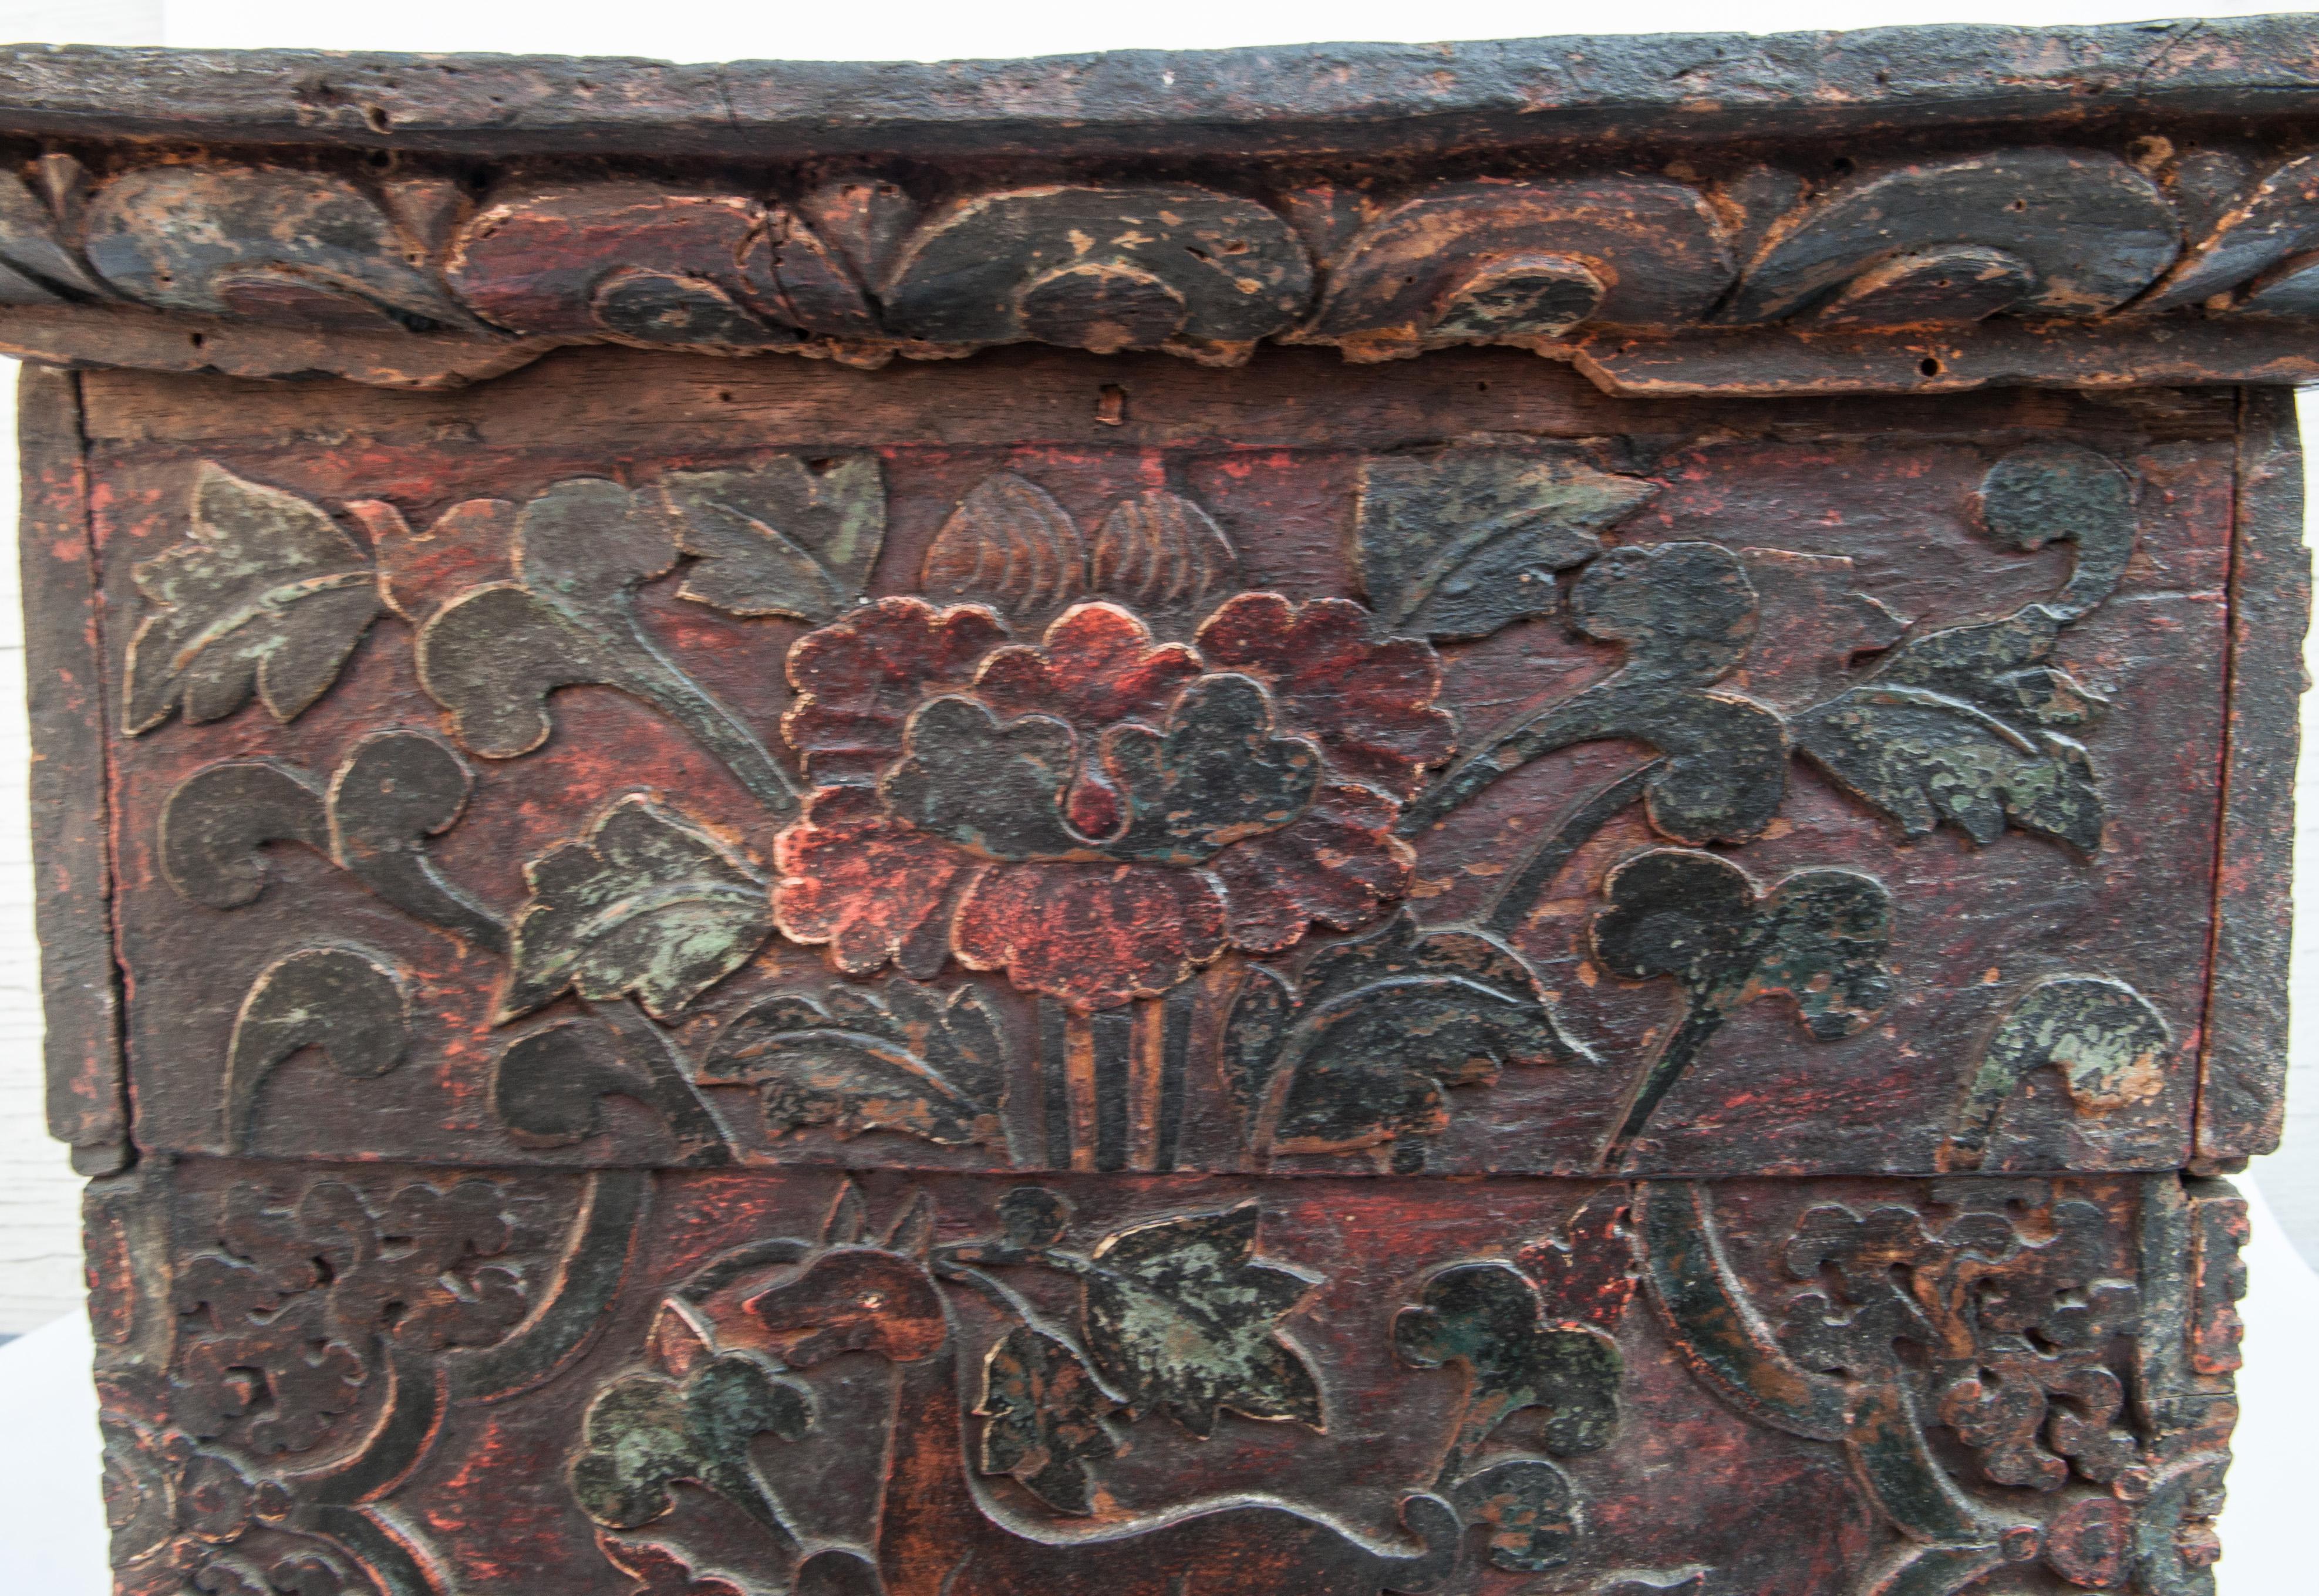 Wood Antique Tibetan Style Religious Storage Box from Bhutan, 19th Century or Earlier